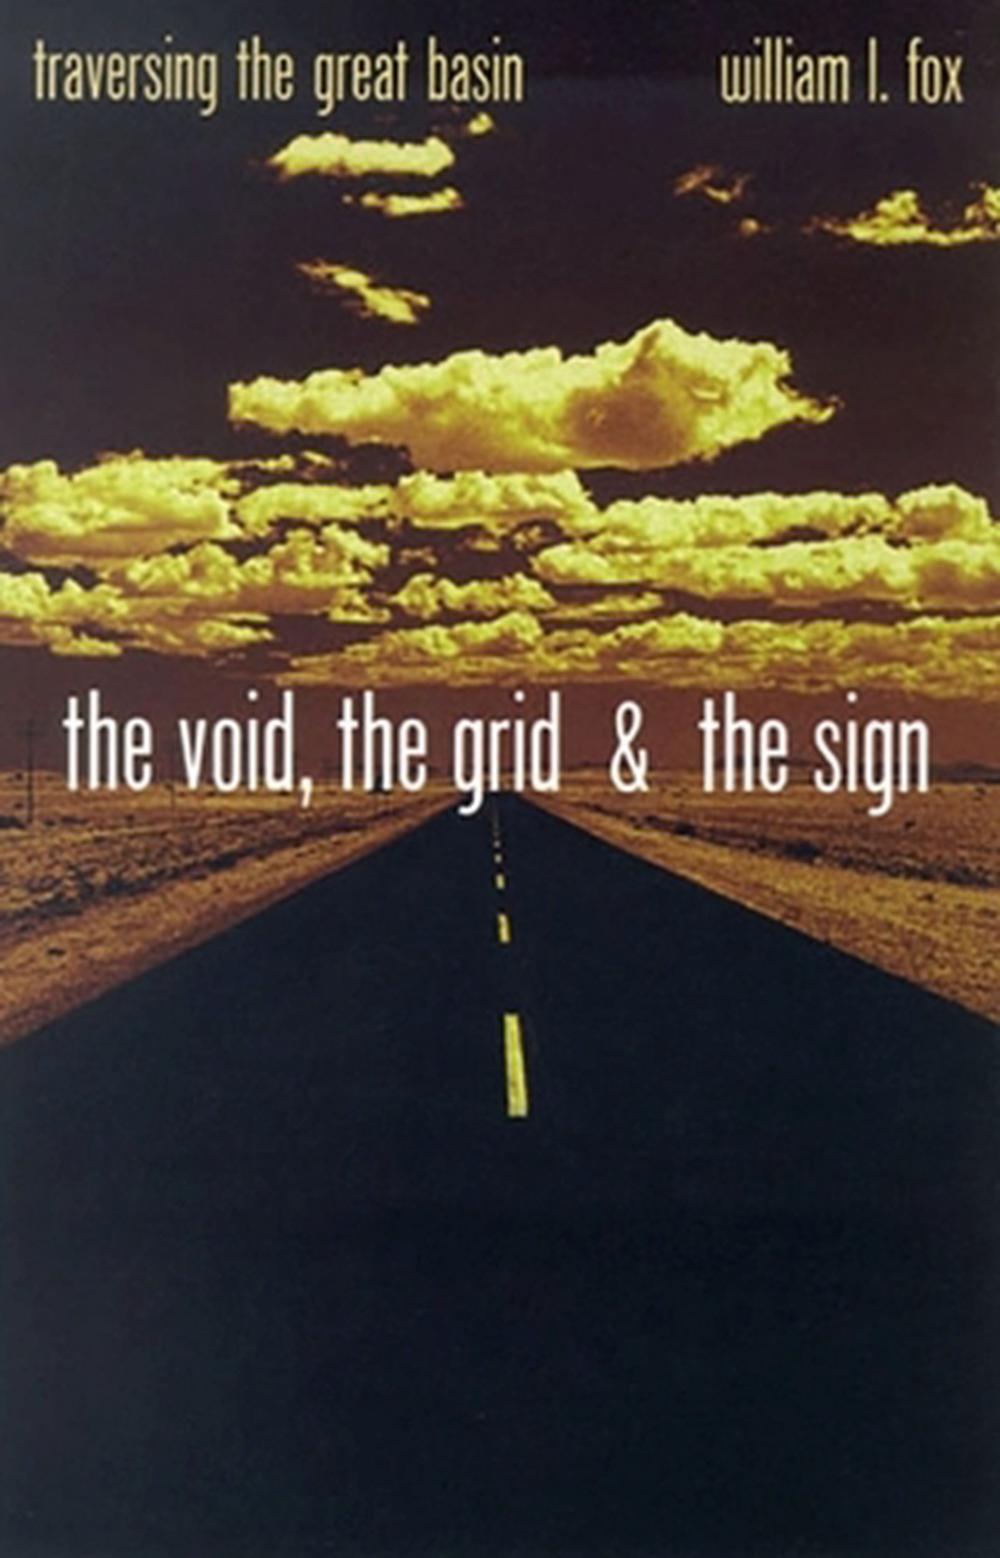 The Void, the Grid & the Sign Traversing the Great Basin by William L